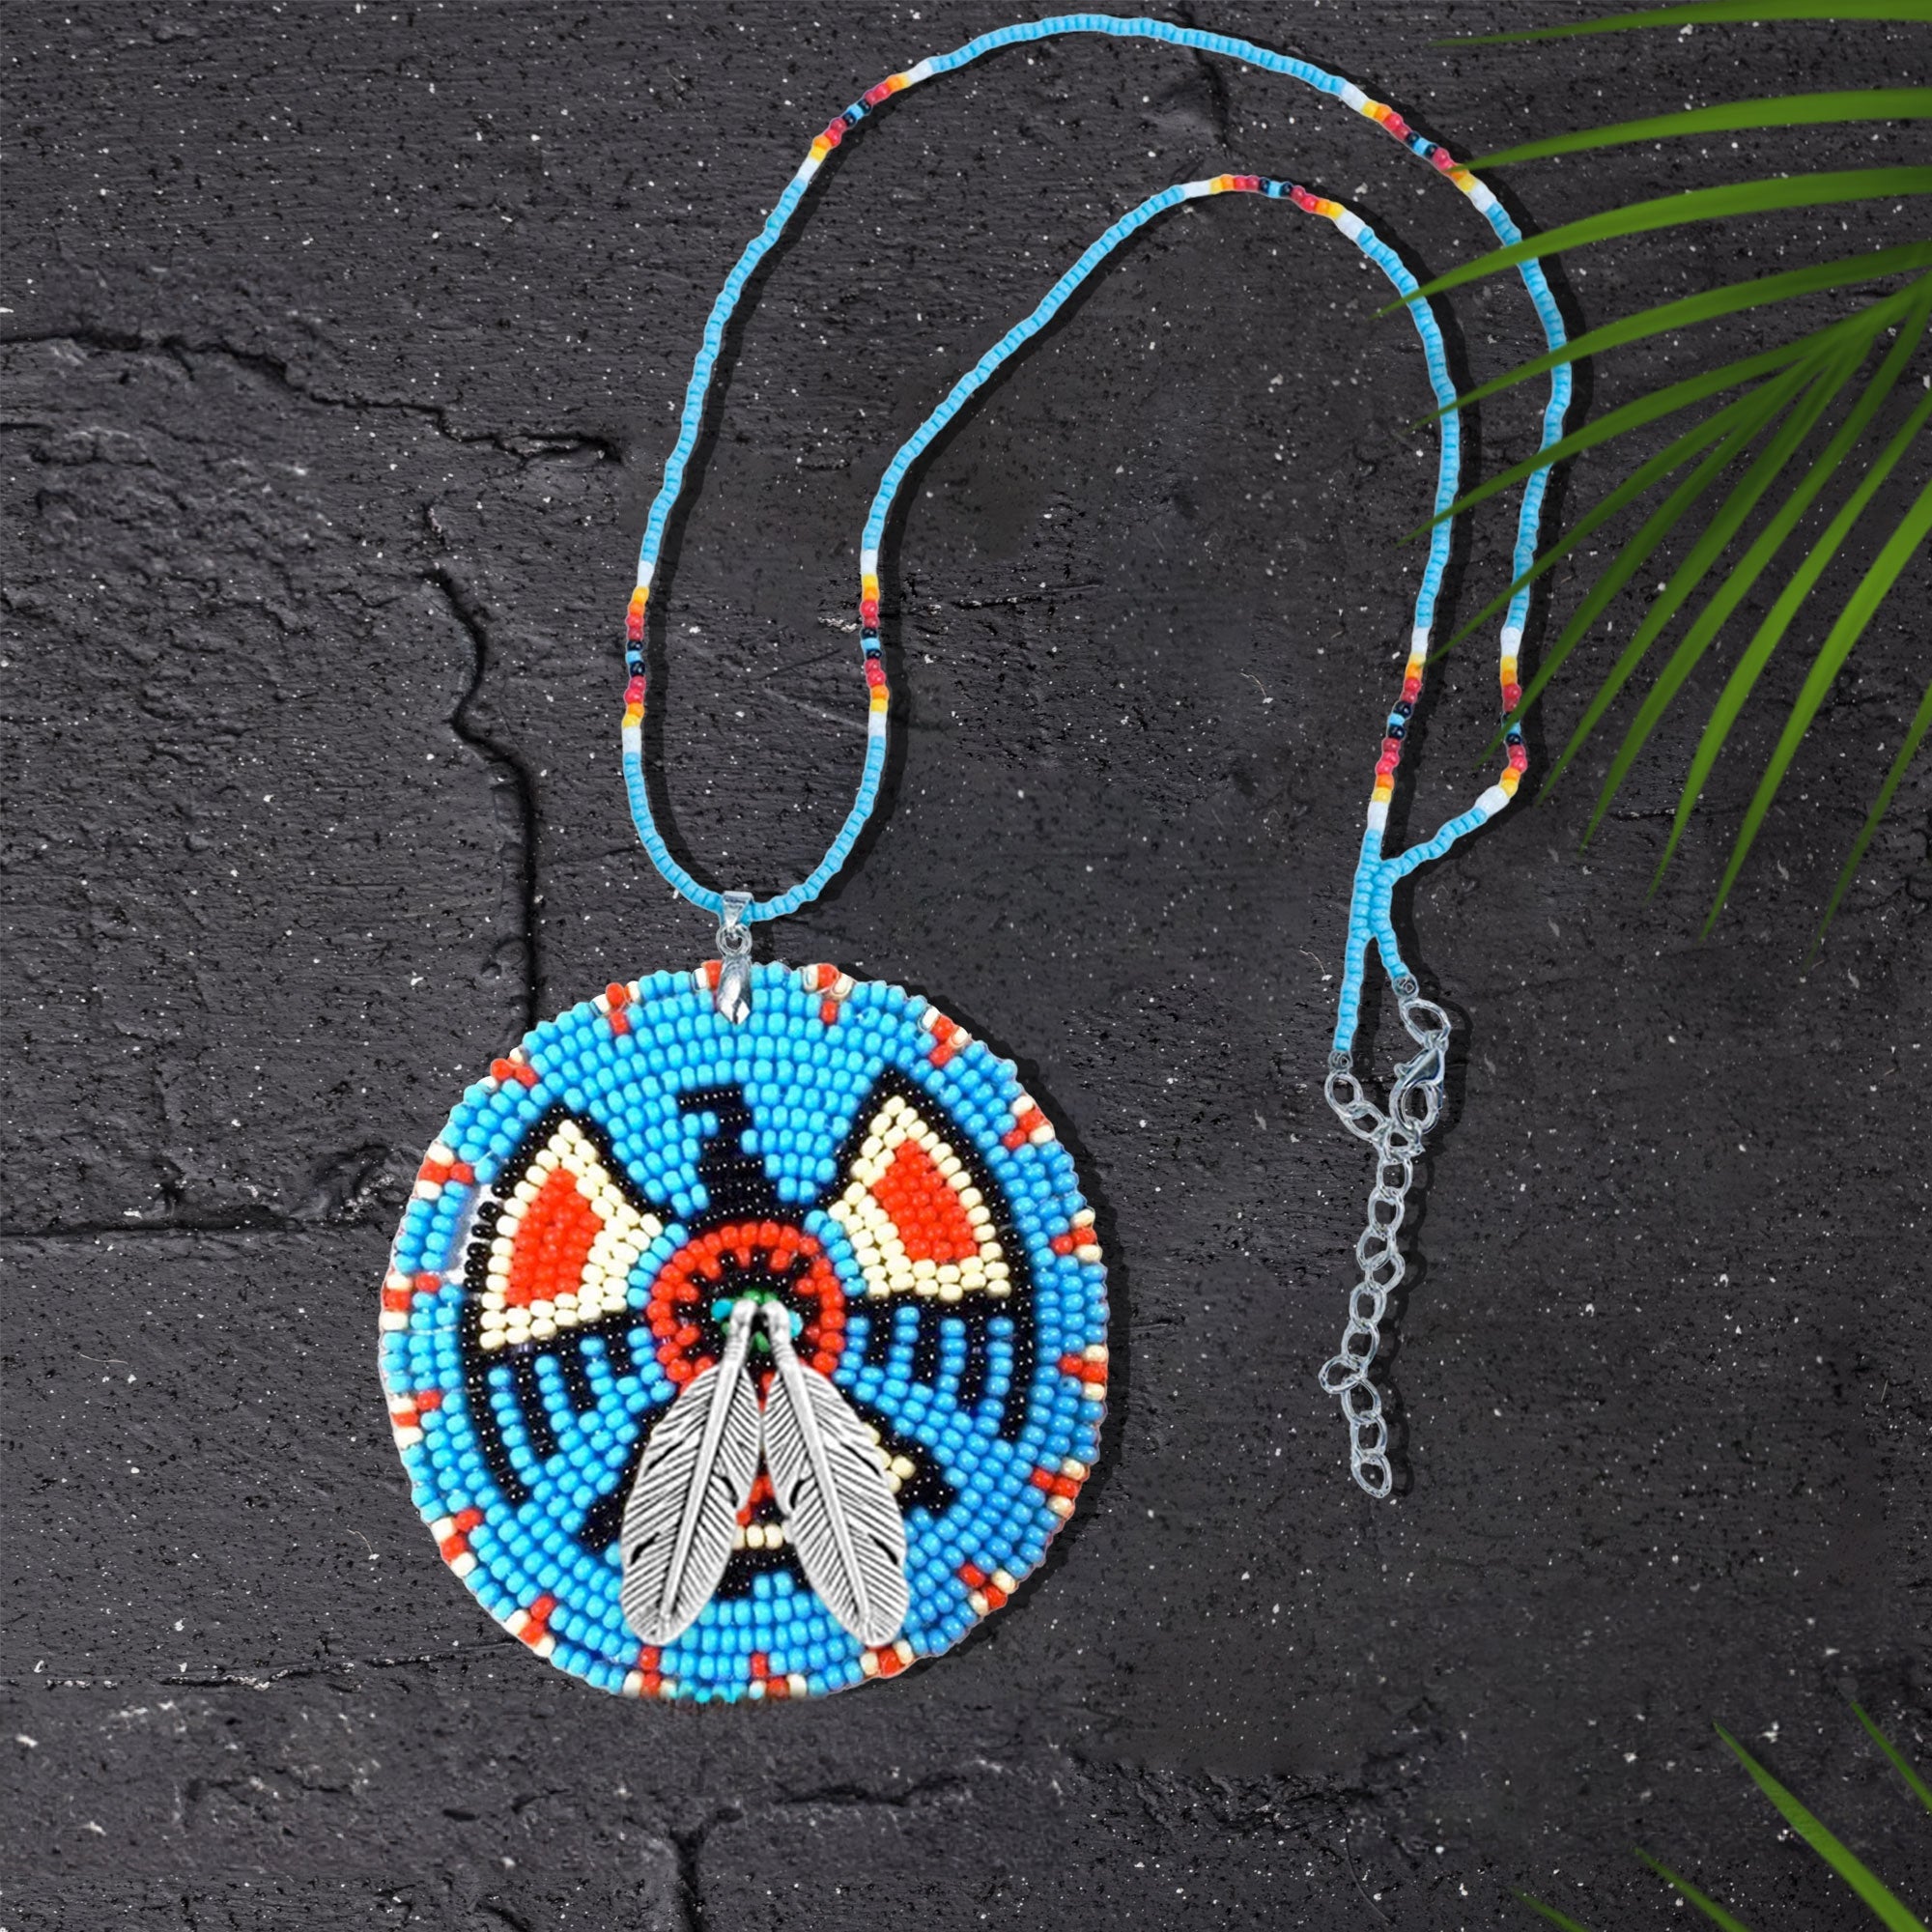 Blue Thunderbird Beaded Patch Necklace Pendant Unisex With Native American Style